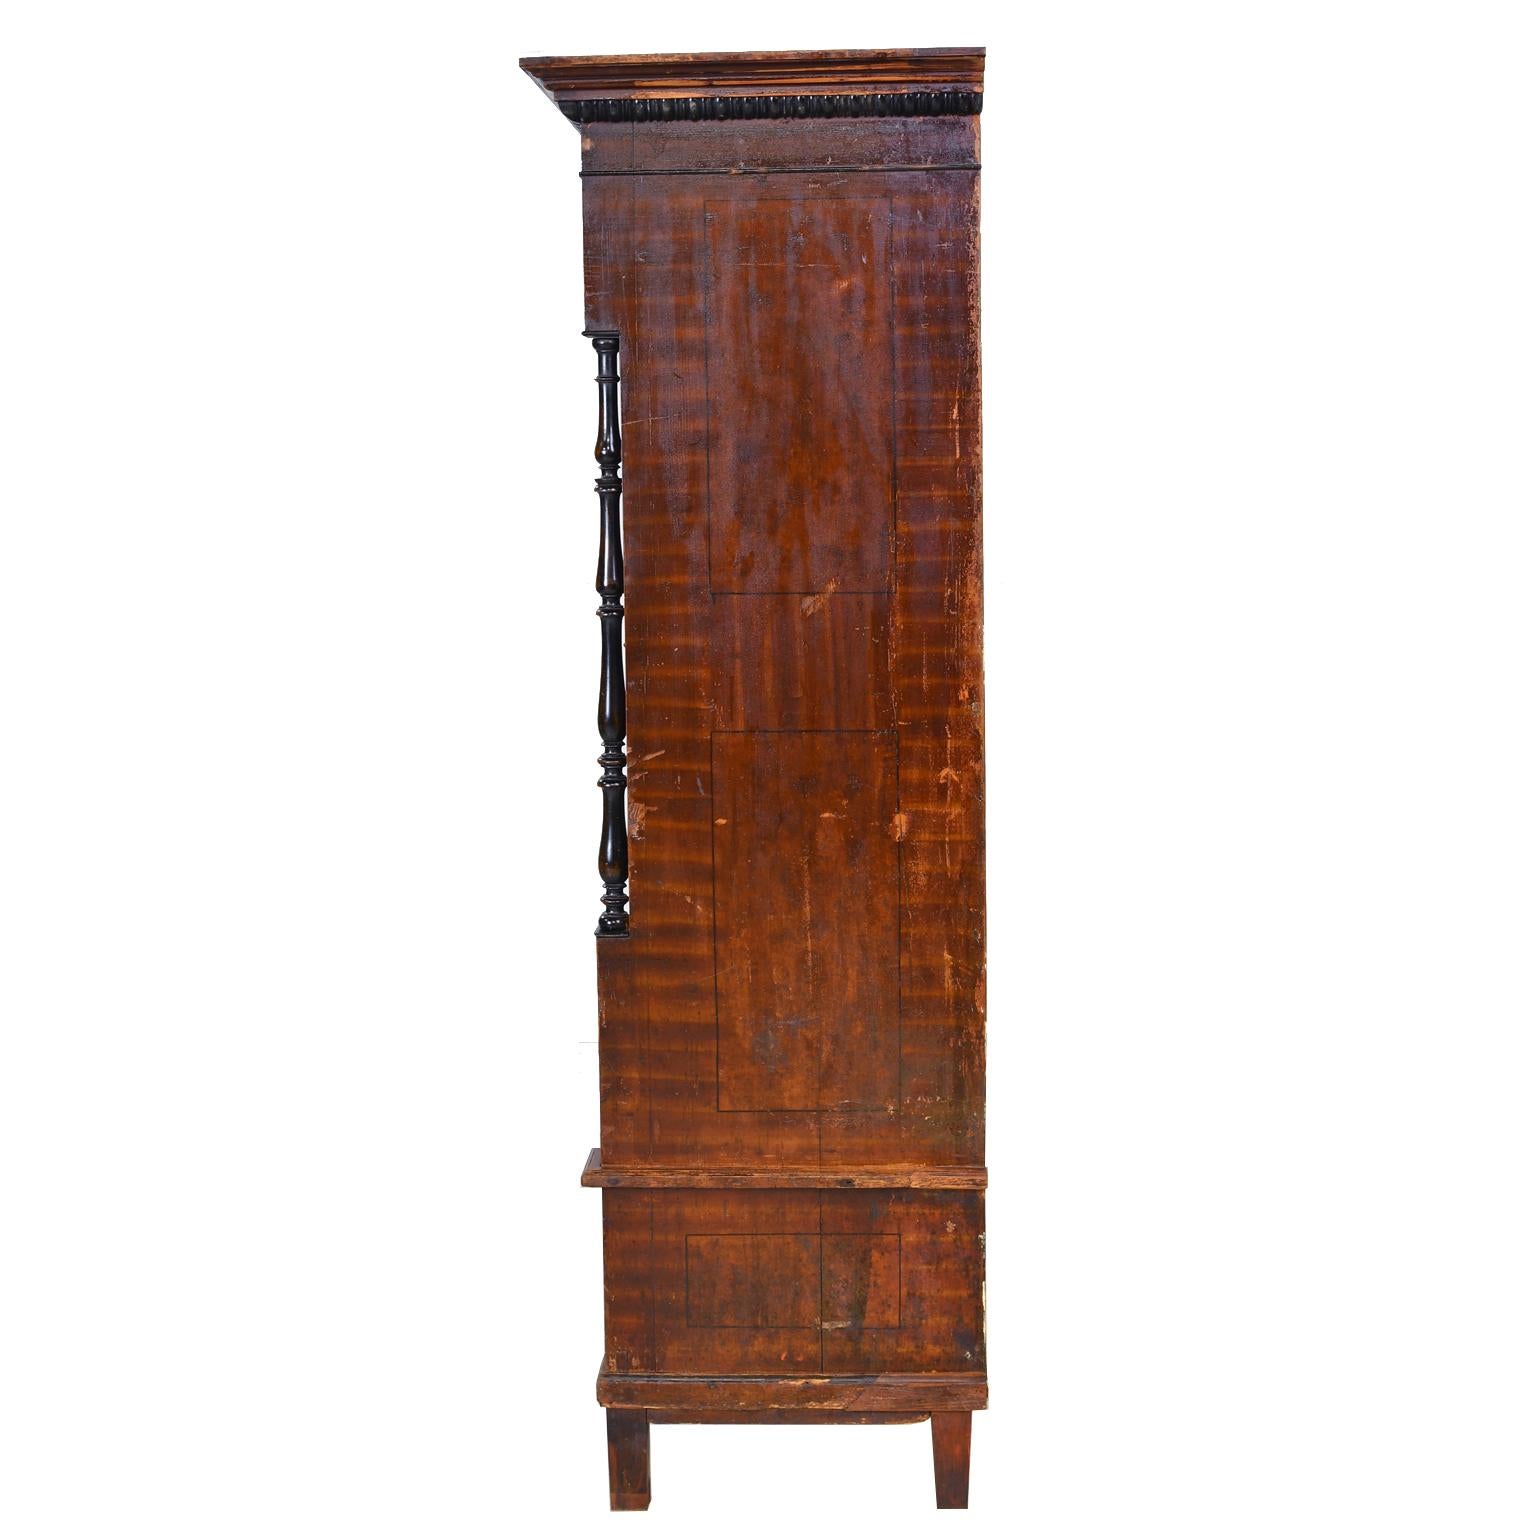 Early 19th Century Austrian Armoire with Original Tooled Red/Maroon Painted Finish, circa 1800